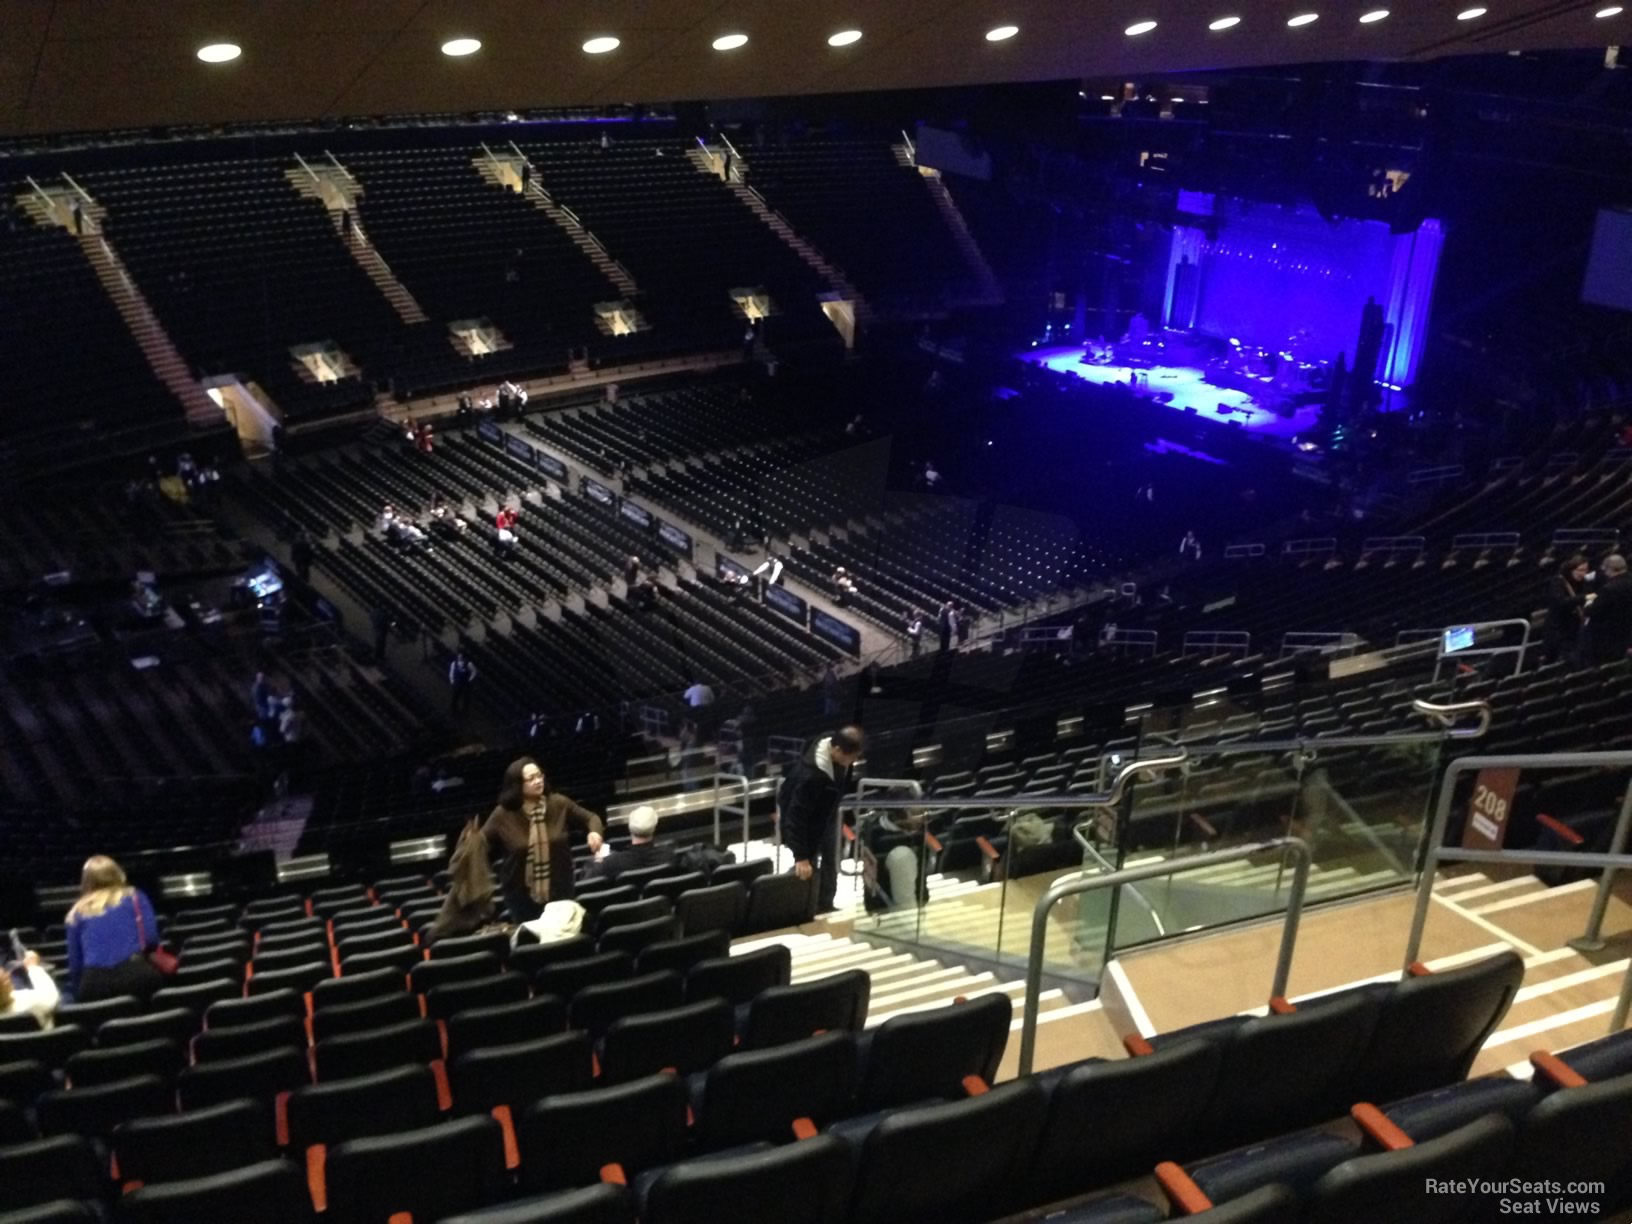 section 208, row 16 seat view  for concert - madison square garden